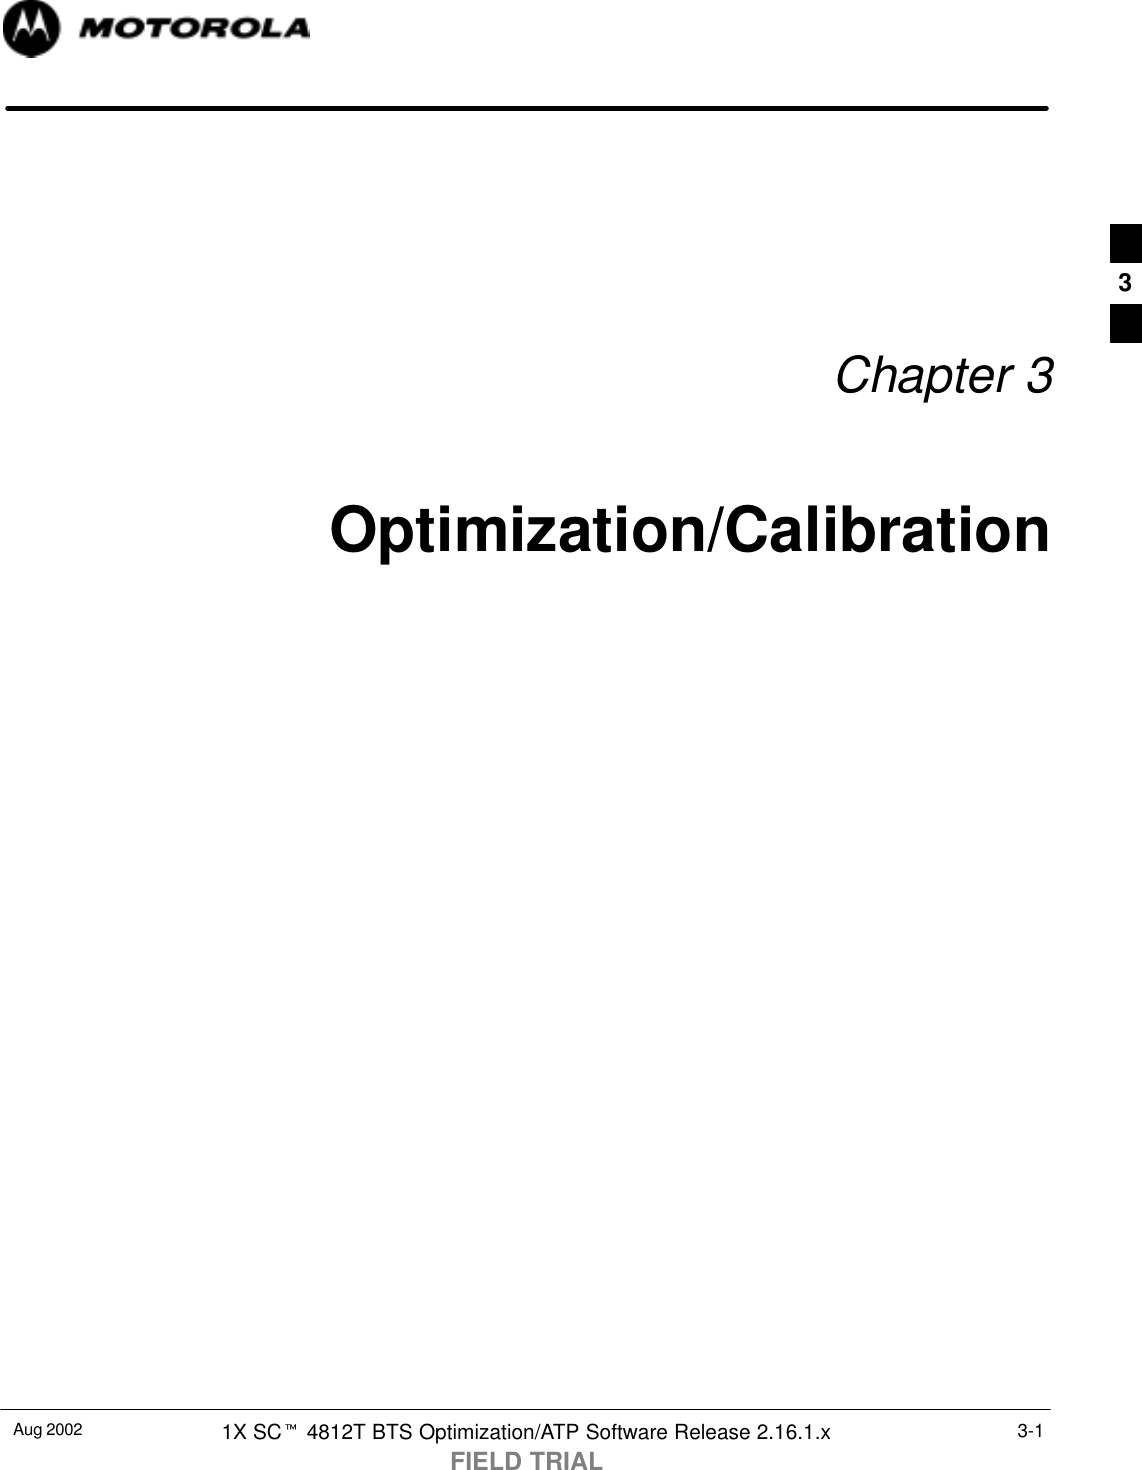 Aug 2002 1X SCt 4812T BTS Optimization/ATP Software Release 2.16.1.xFIELD TRIAL3-1Chapter 3Optimization/Calibration3